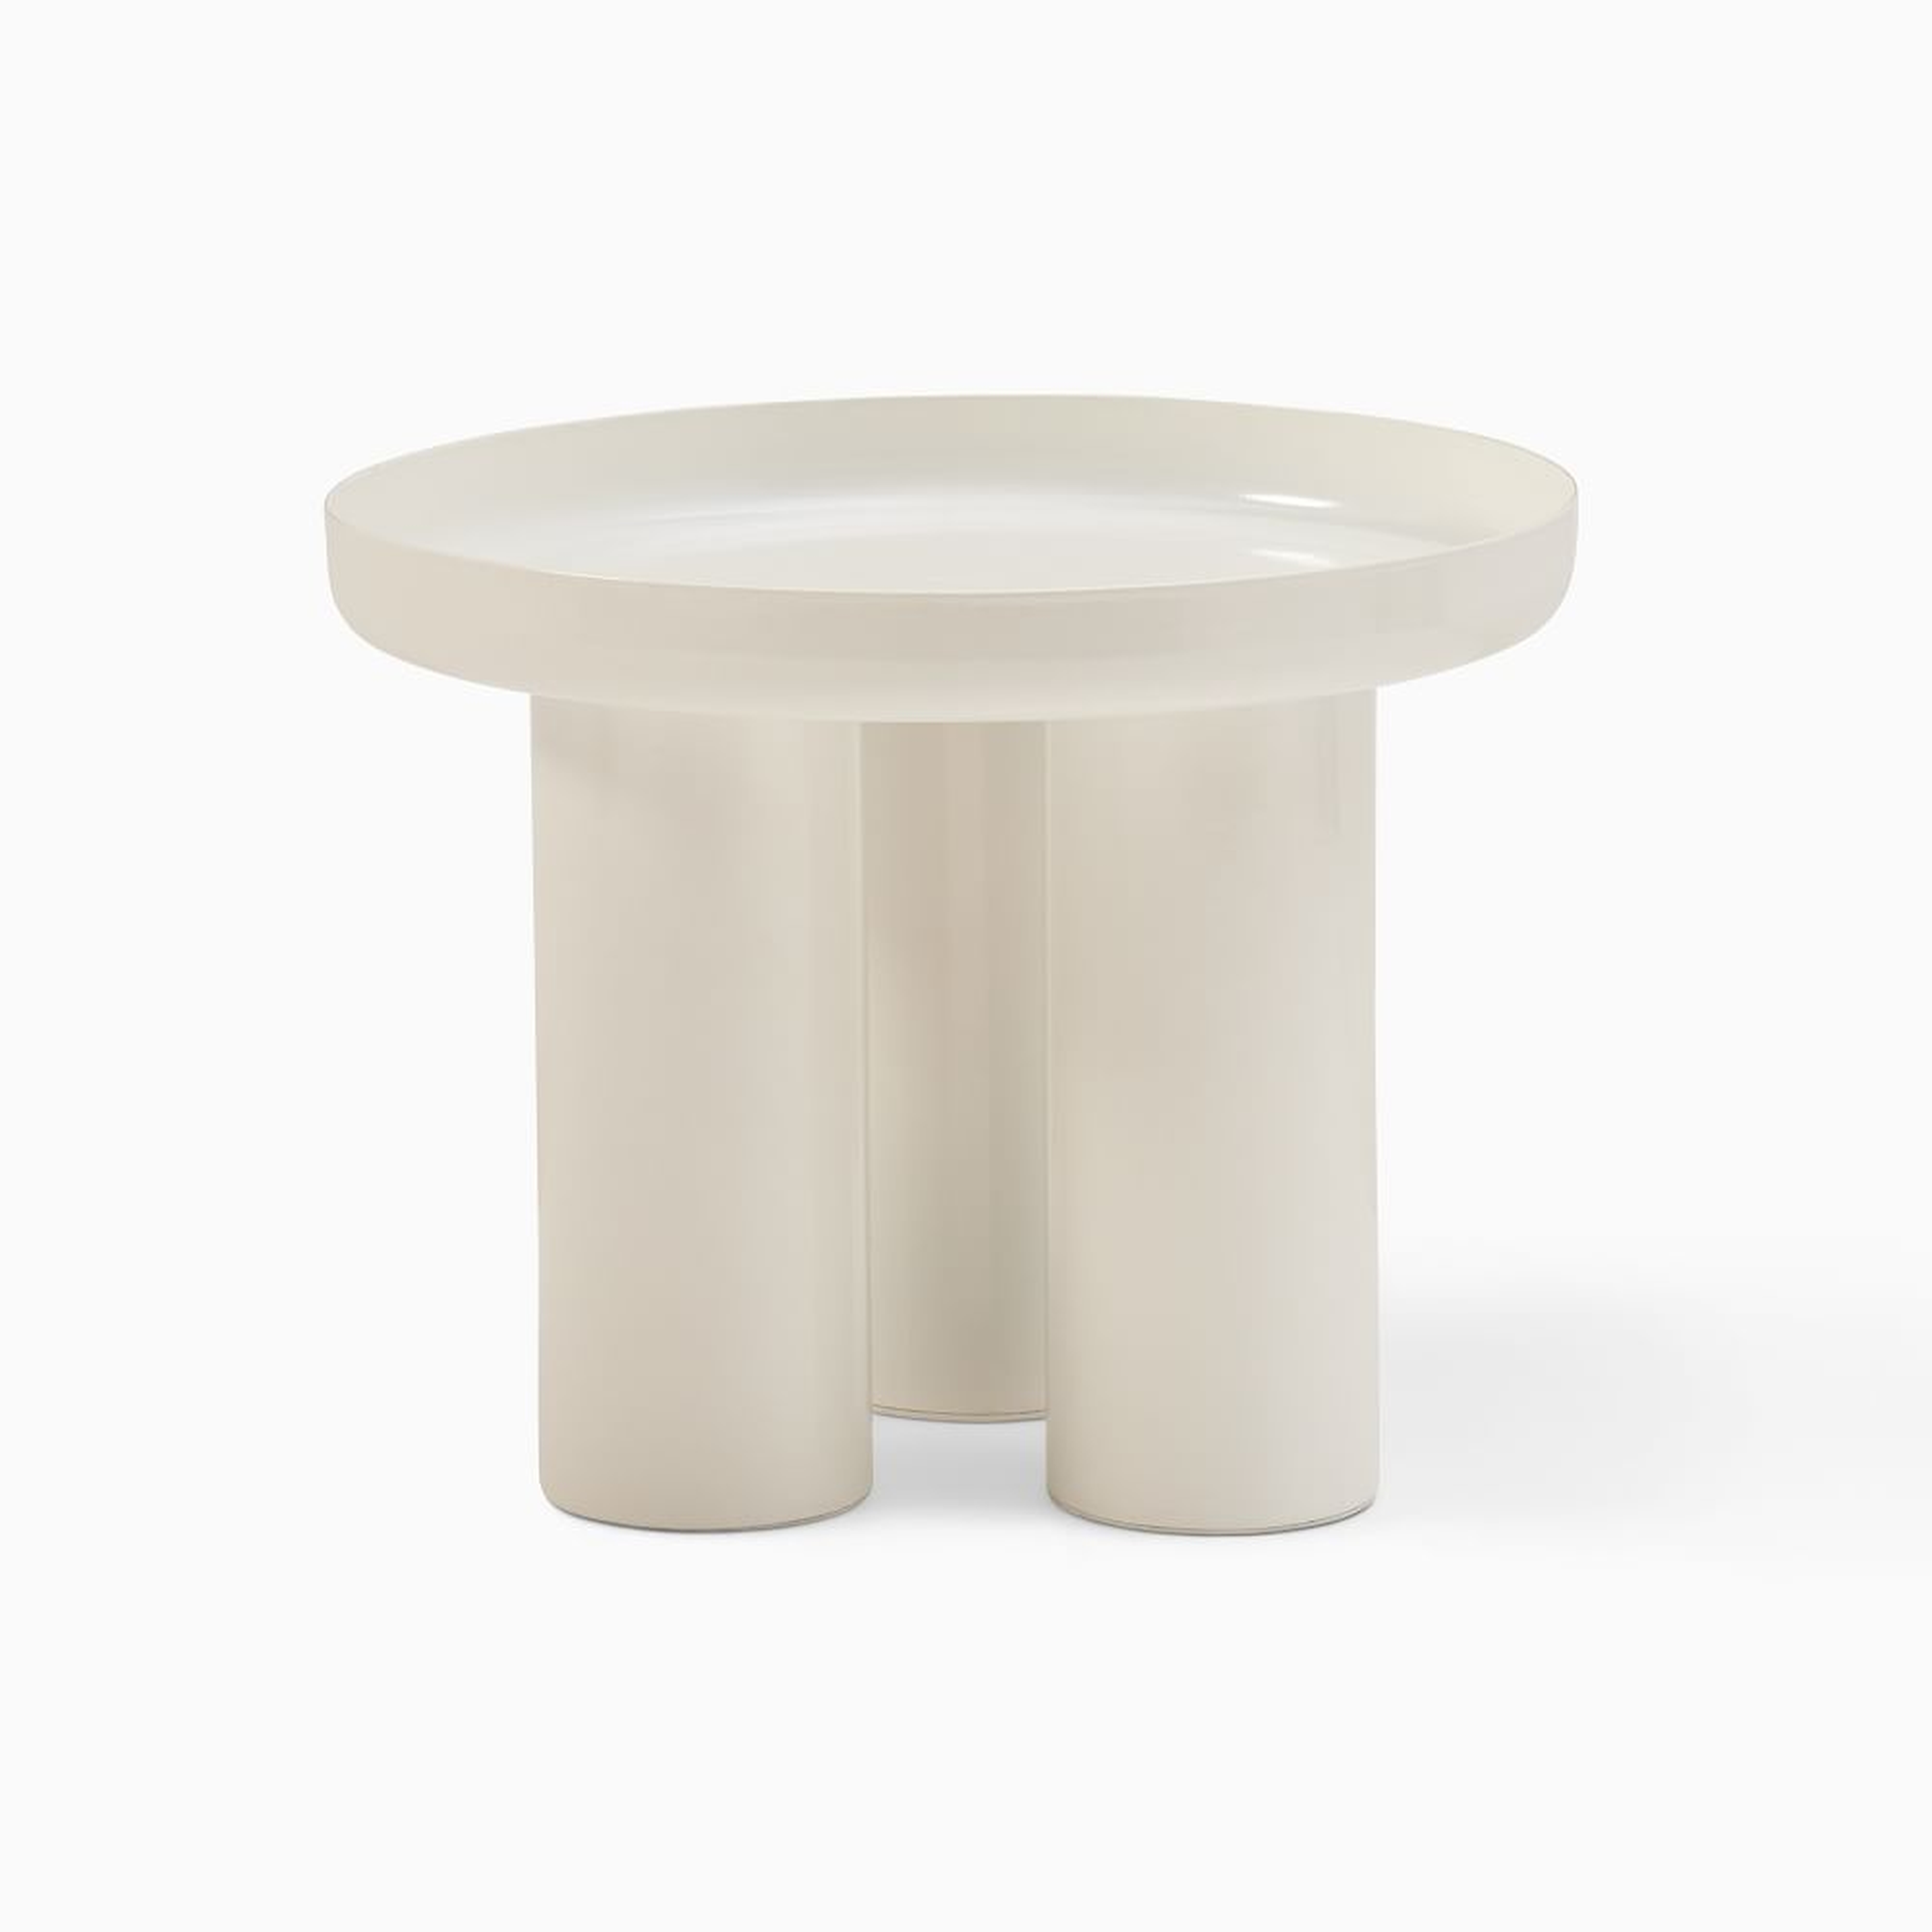 Plant Kween Metal Plant Stand, White - West Elm